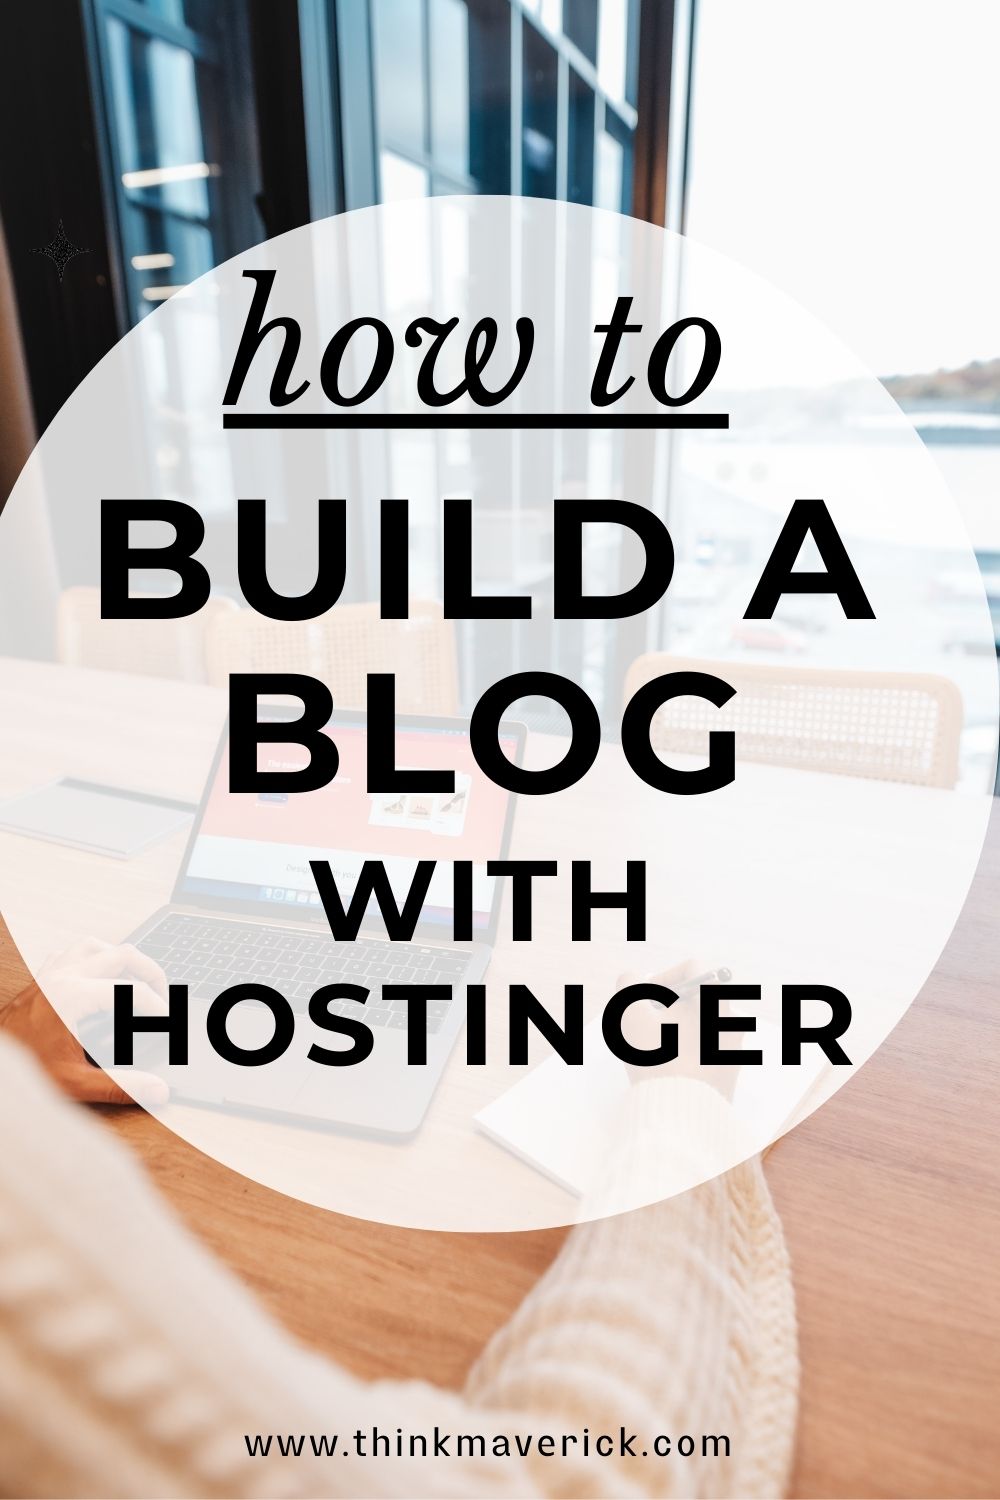 How to Build a Blog with Hostinger - A one-stop shop for Domain, Hosting, and Builder. thinkmaverick